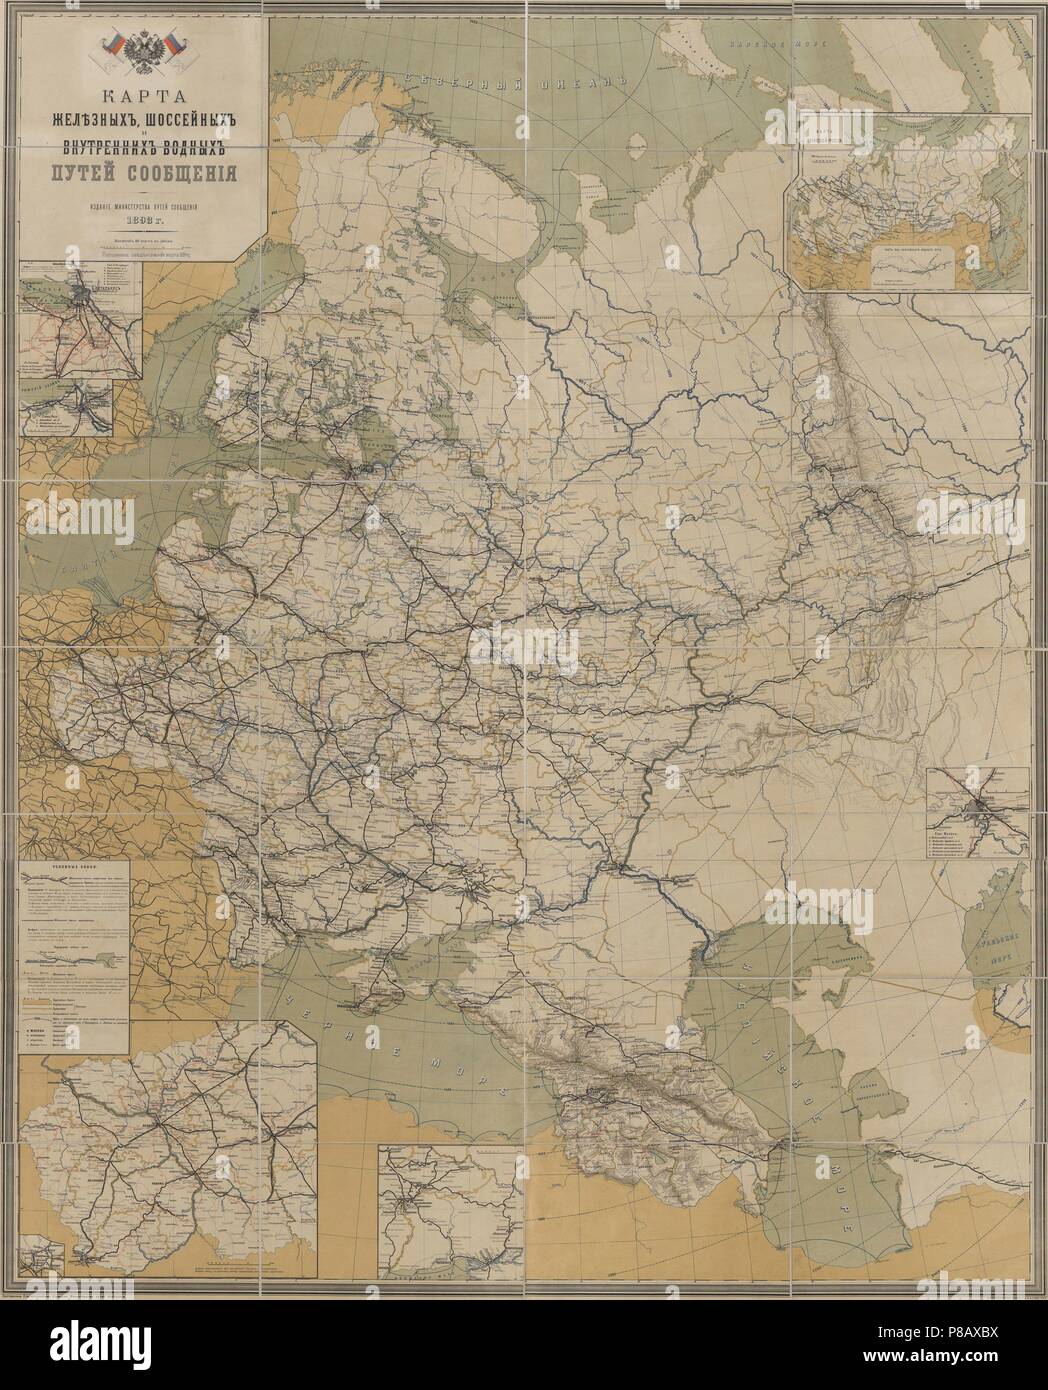 Map of Roads, Railroads and Inland Waterways of the Russian Empire, 1893. Museum: State Museum of Revolution, Moscow. Stock Photo